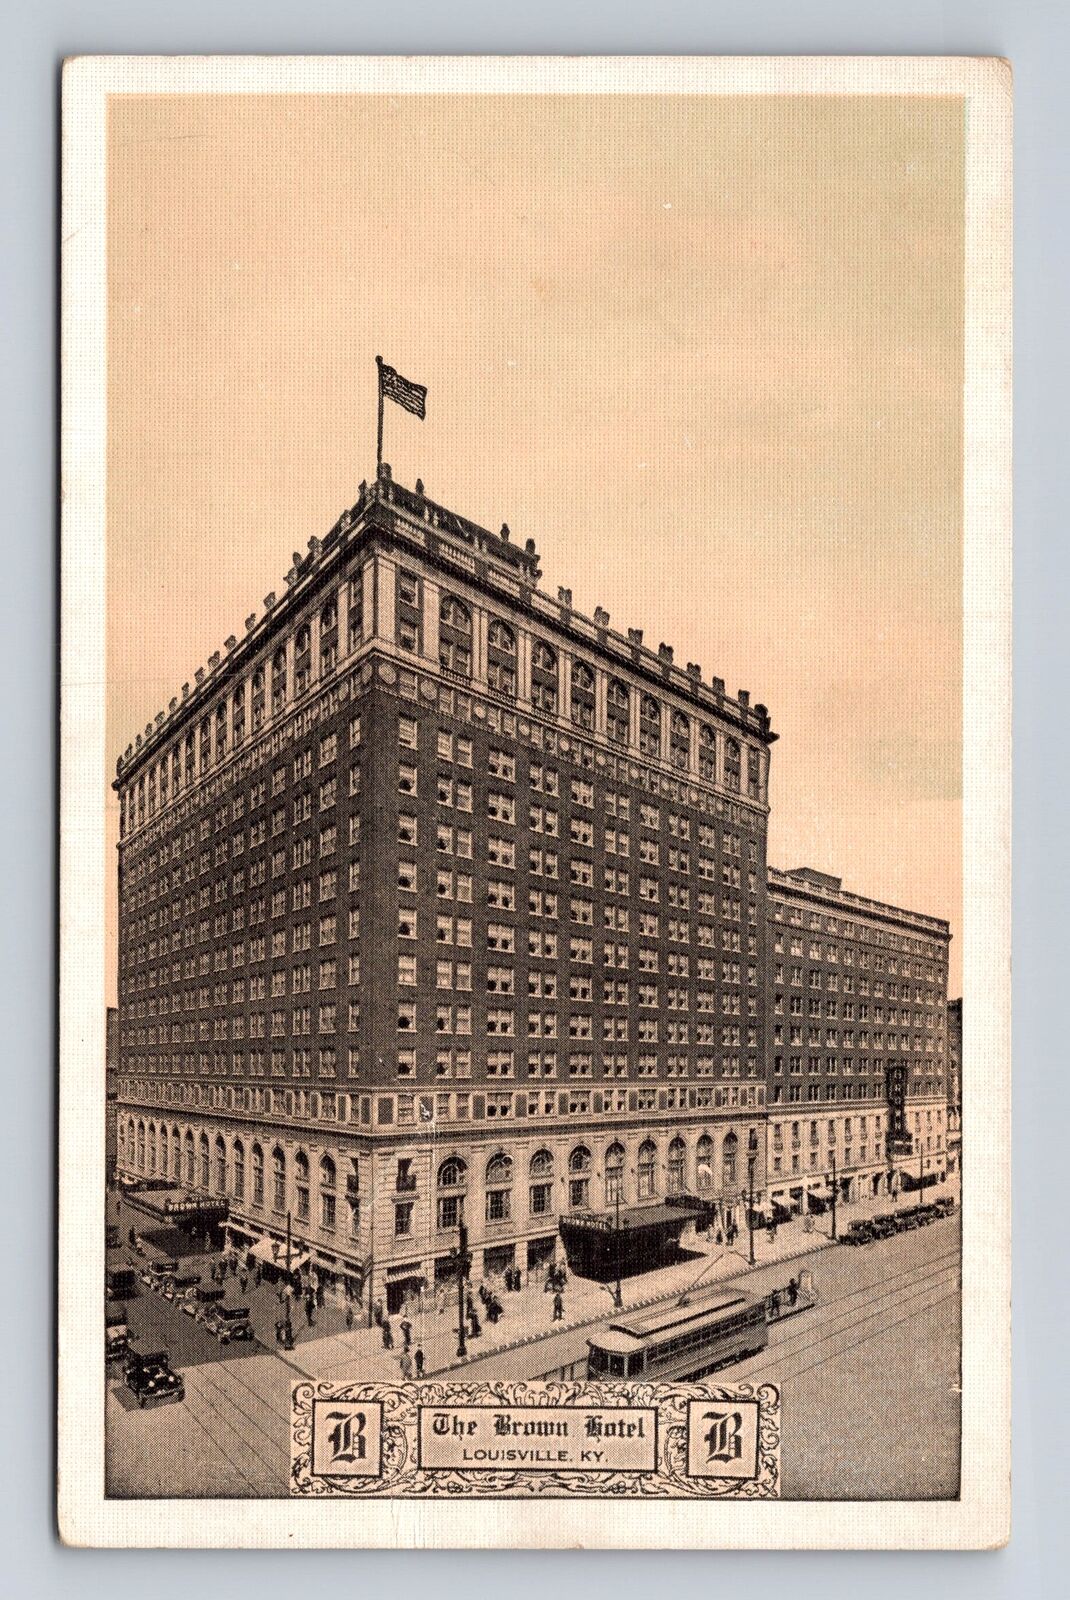 Louisville KY-Kentucky, the Brown Hotel, Advertising, Antique Vintage Postcard